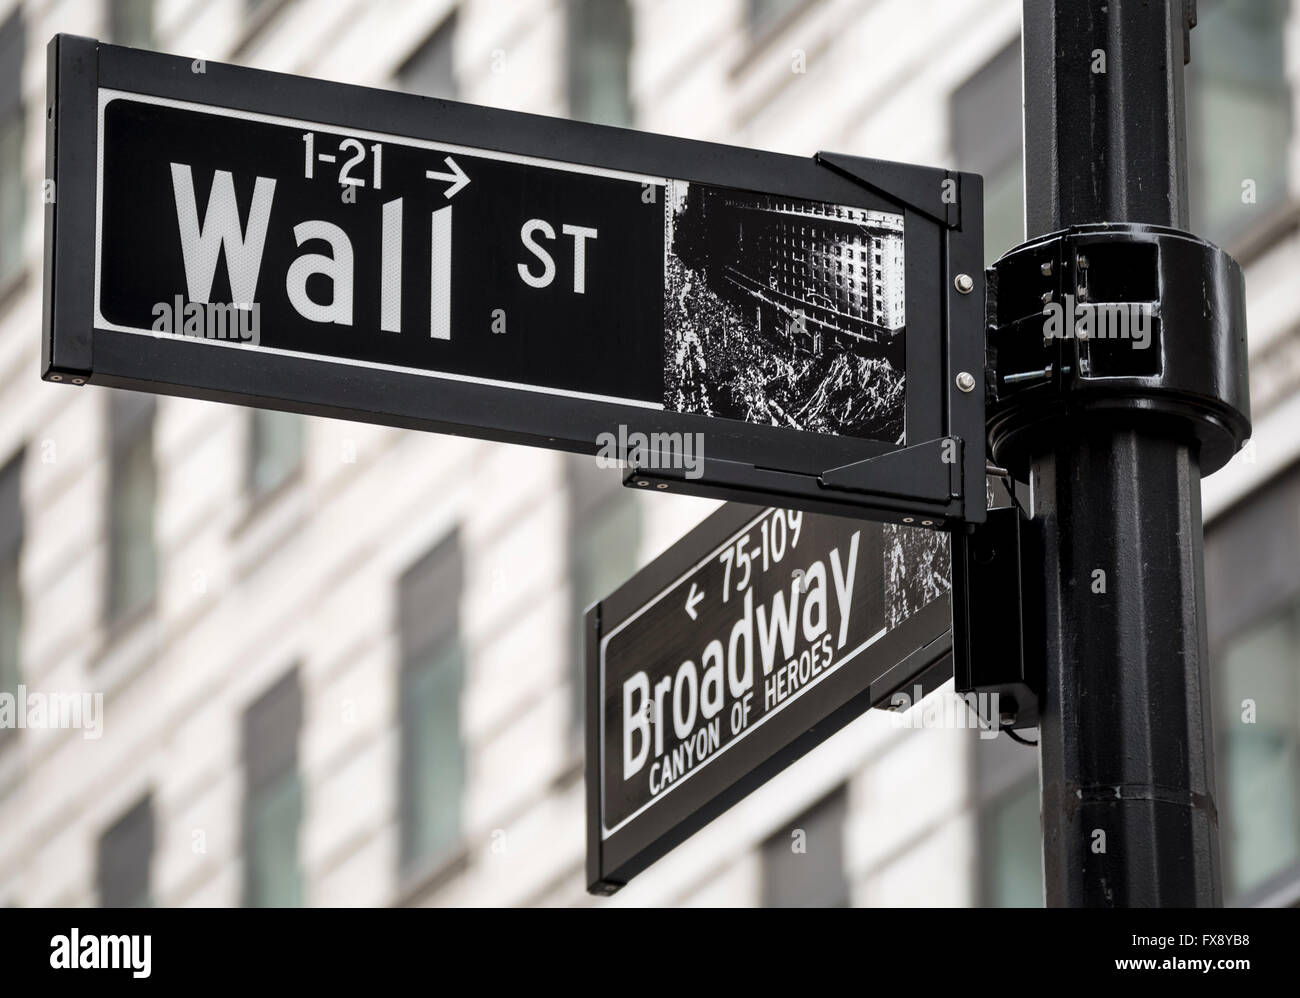 Wall Street and Boradway crossing in New York city, USA Stock Photo